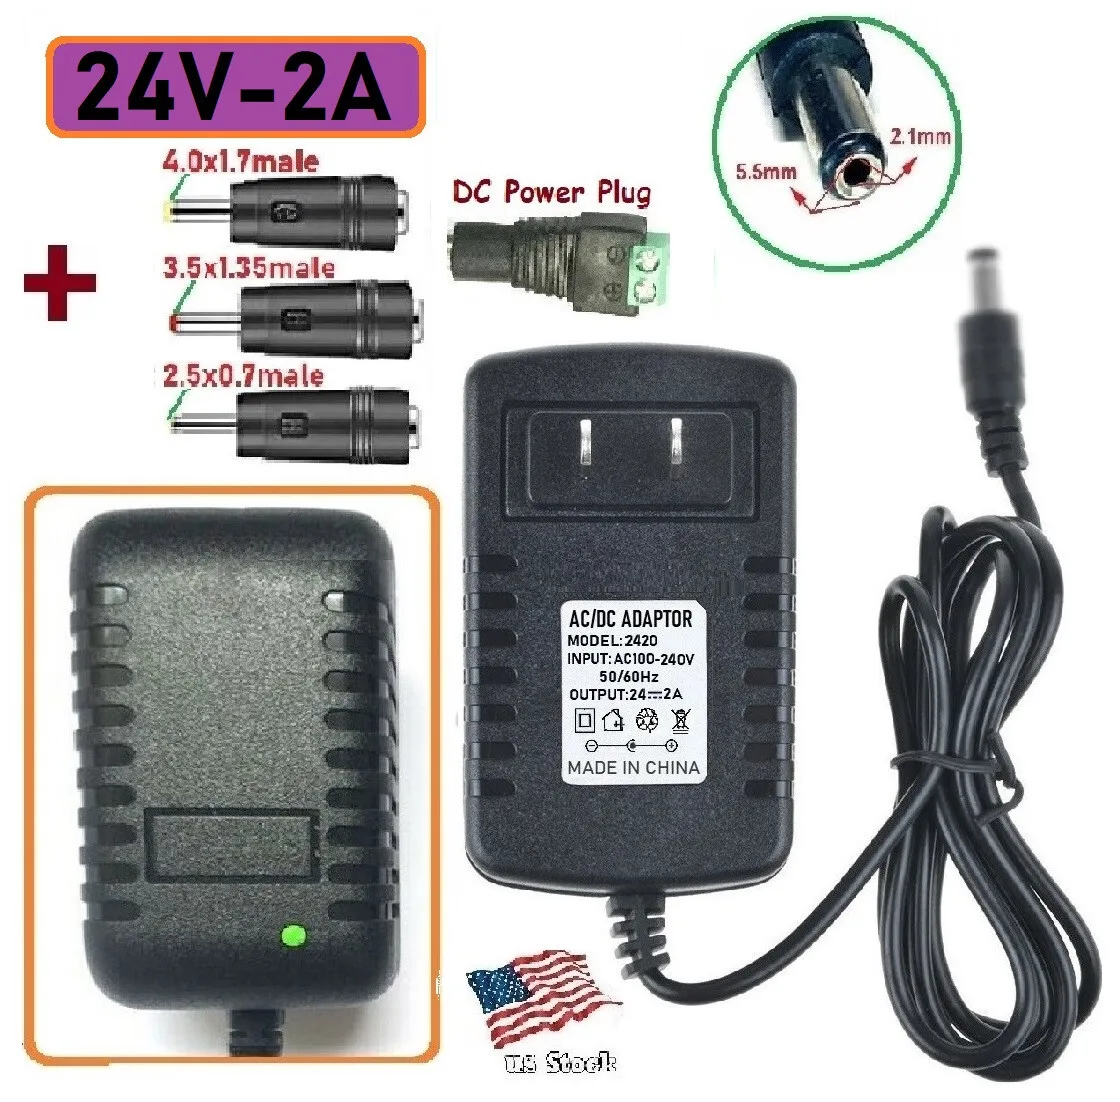 24V 2A 48W AC/DC Adapter Power Supply for Home Electronics + 4 Power Plug  Tips